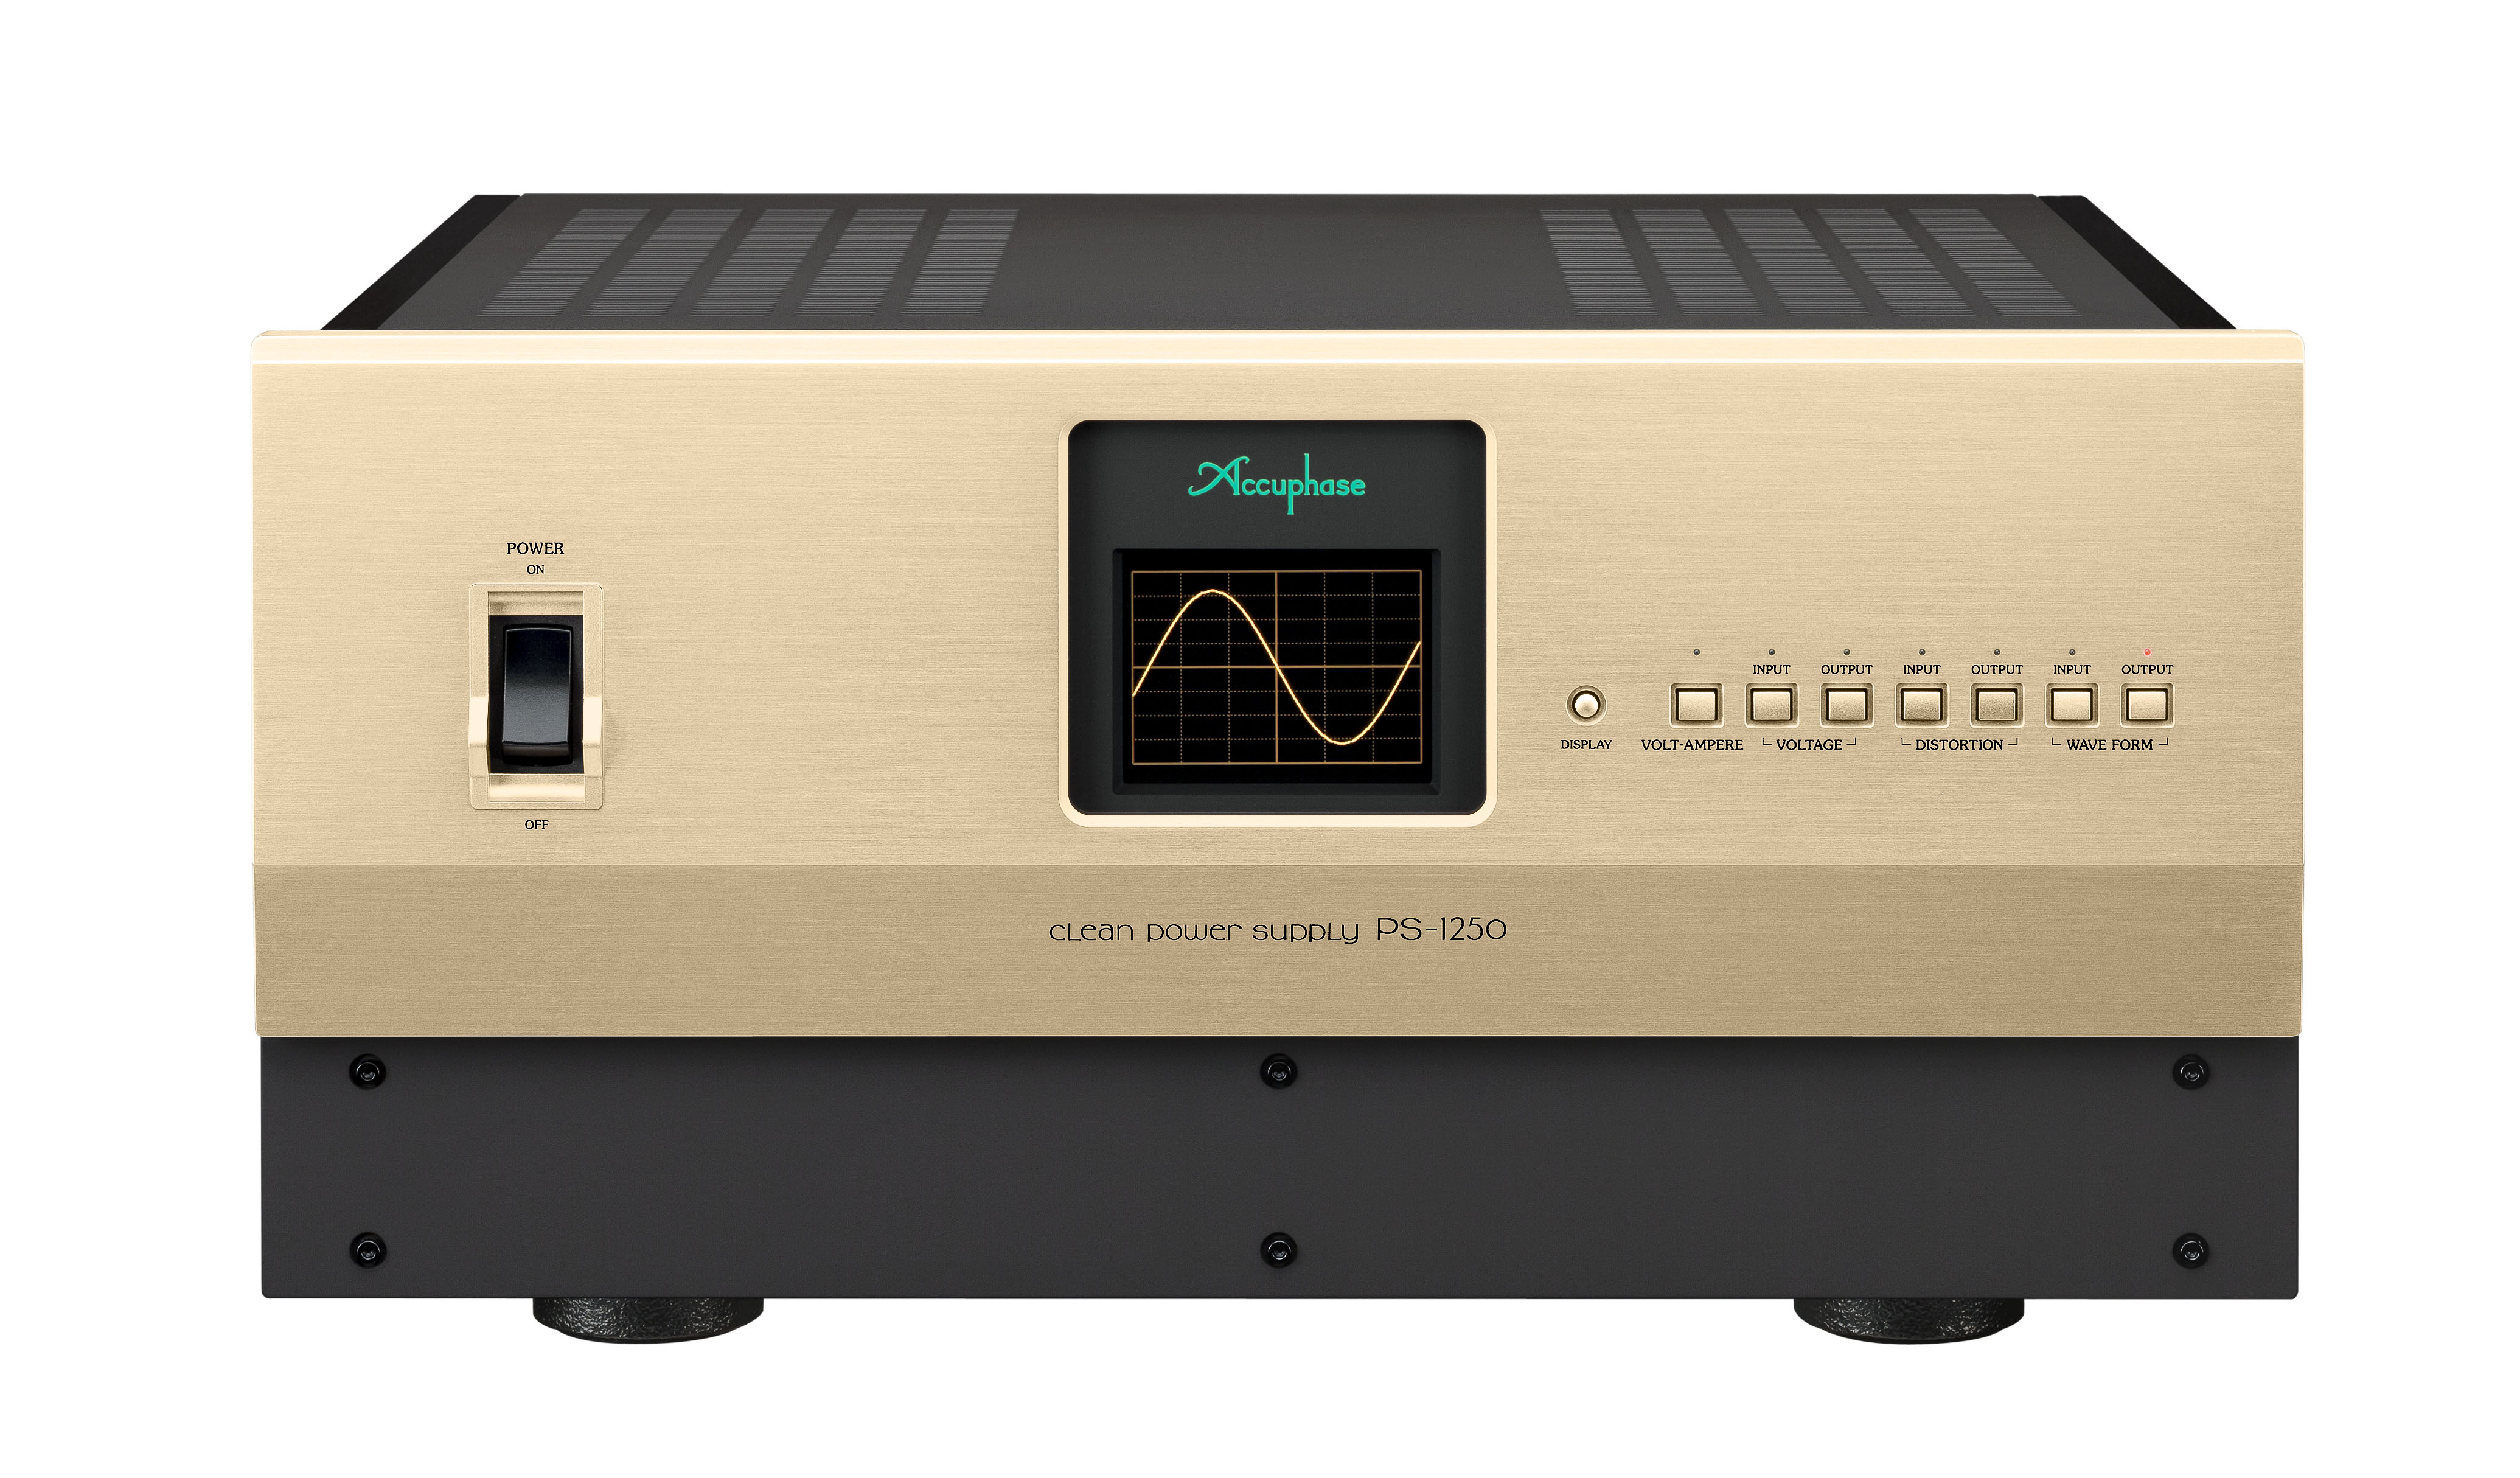 Accuphase PS-1250 (80)